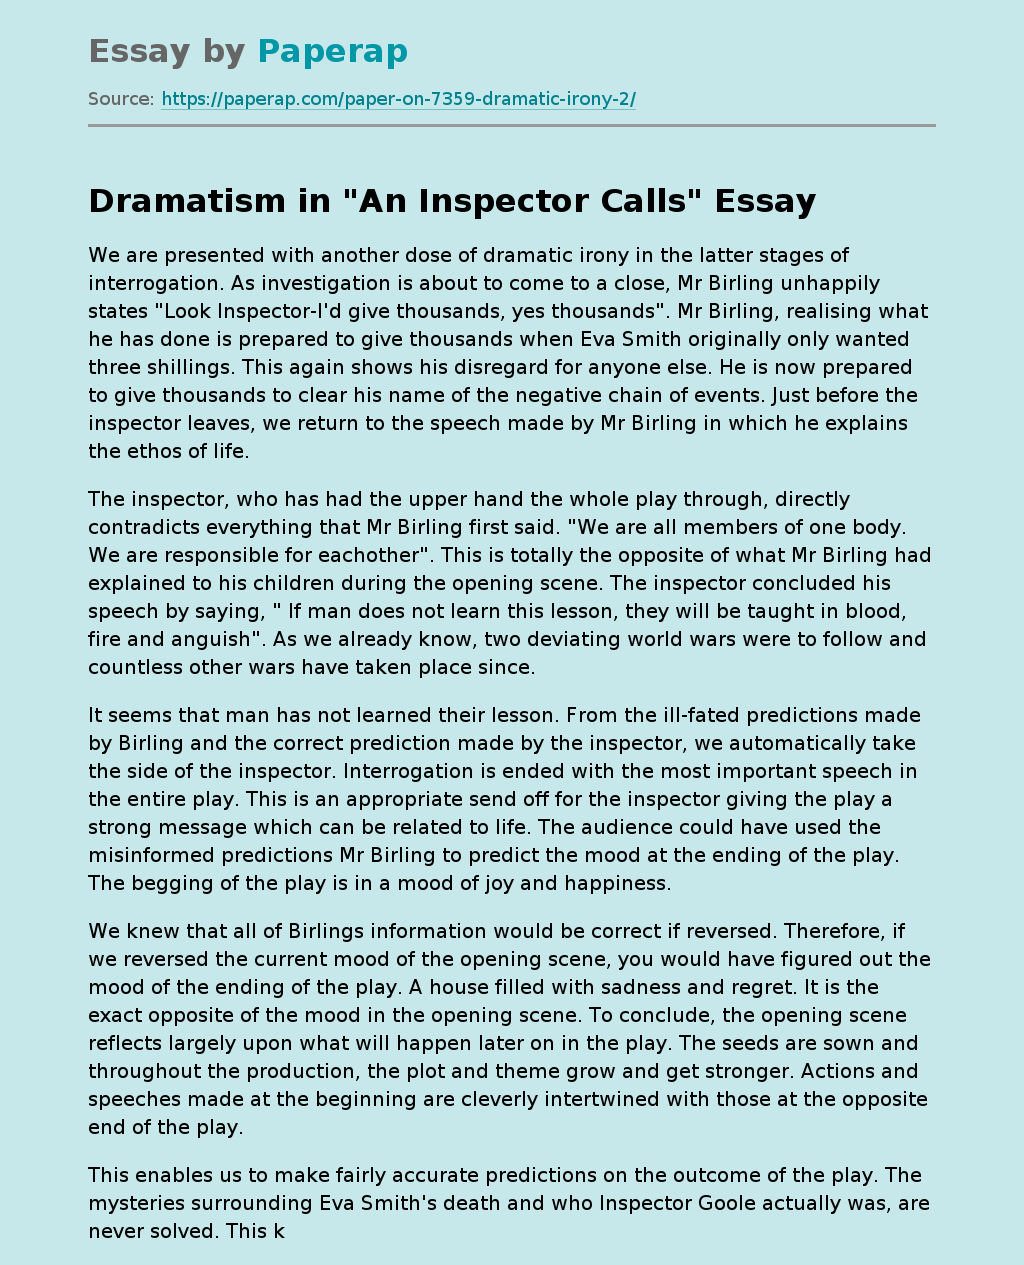 Dramatism in "An Inspector Calls"